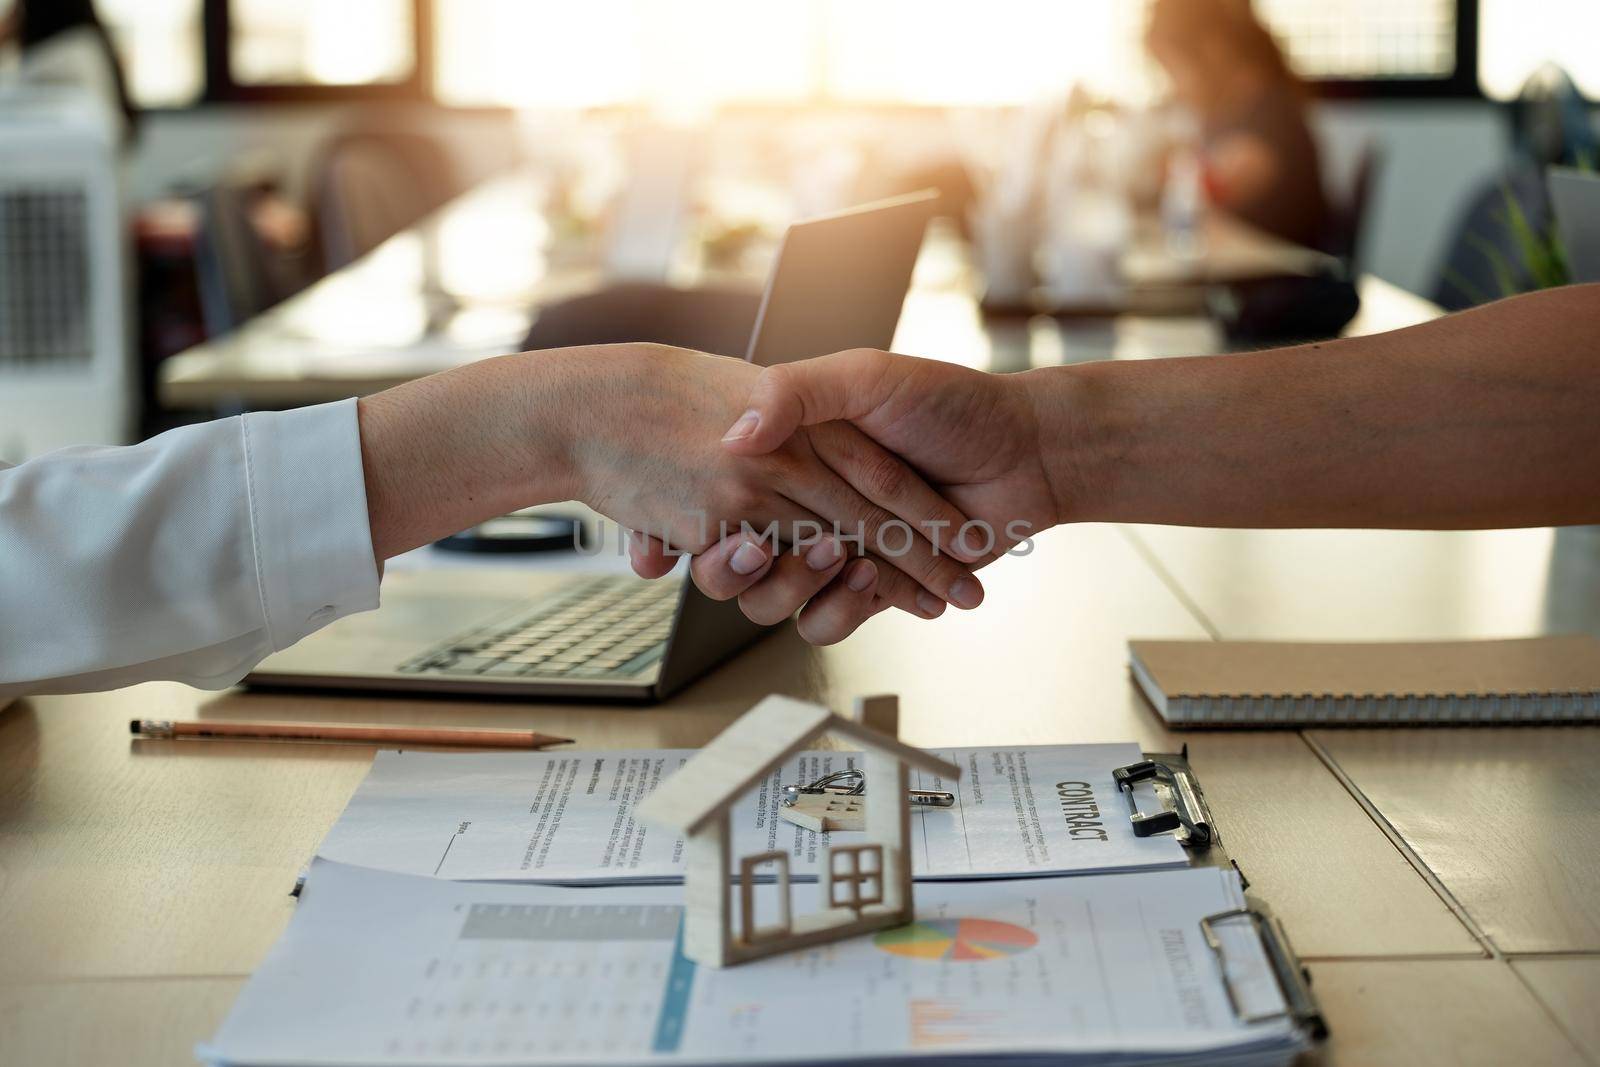 Handshake a successful real estate transaction in an office. Business people shake hands after signing a house purchase agreement. by nateemee